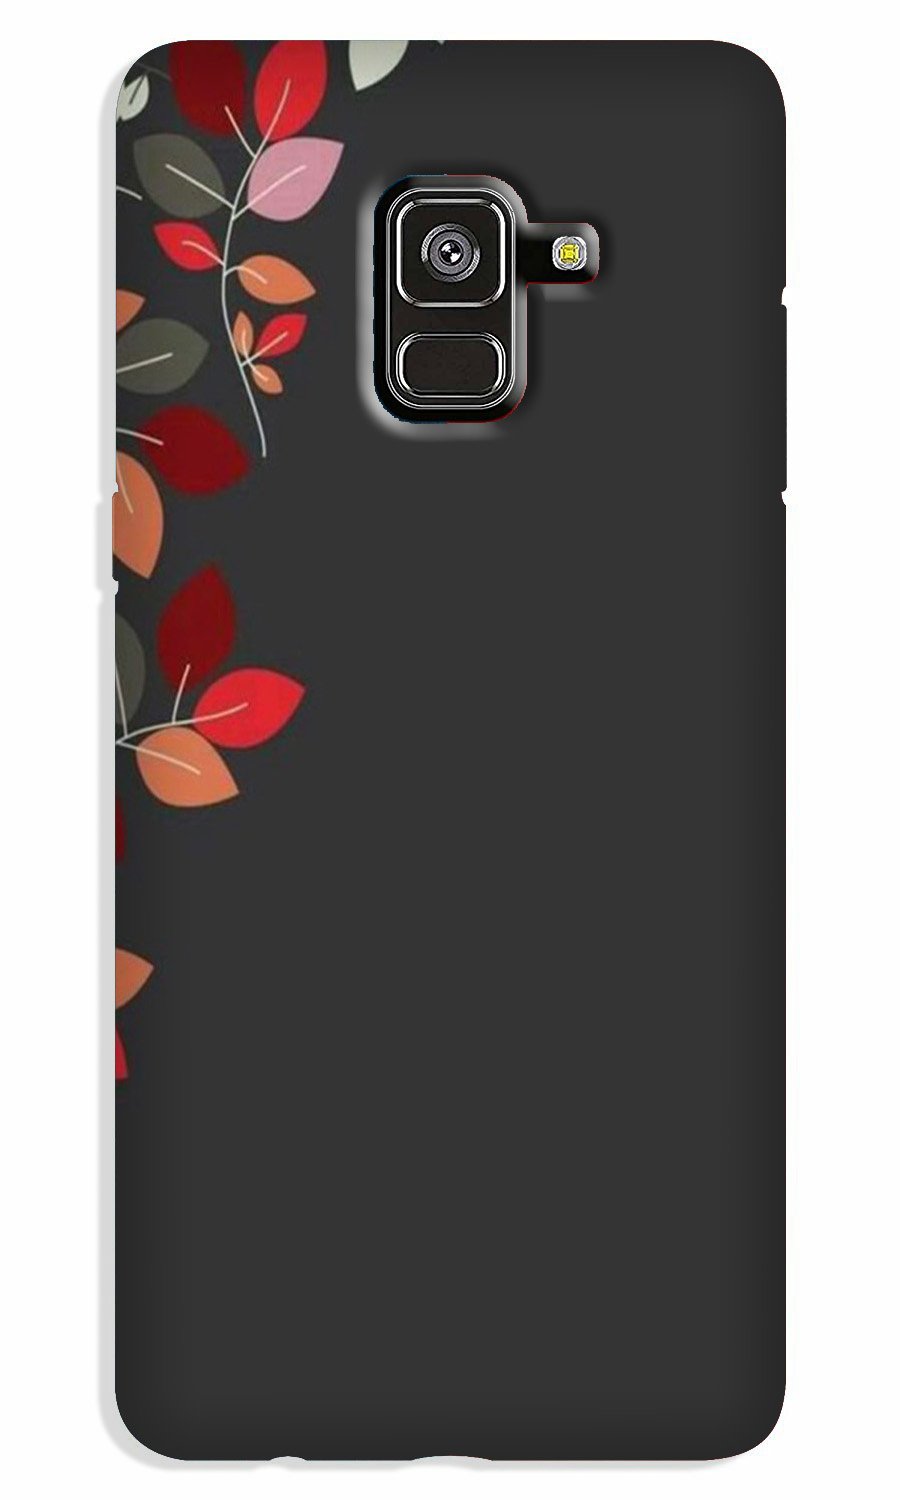 Grey Background Case for Galaxy J6 / On6